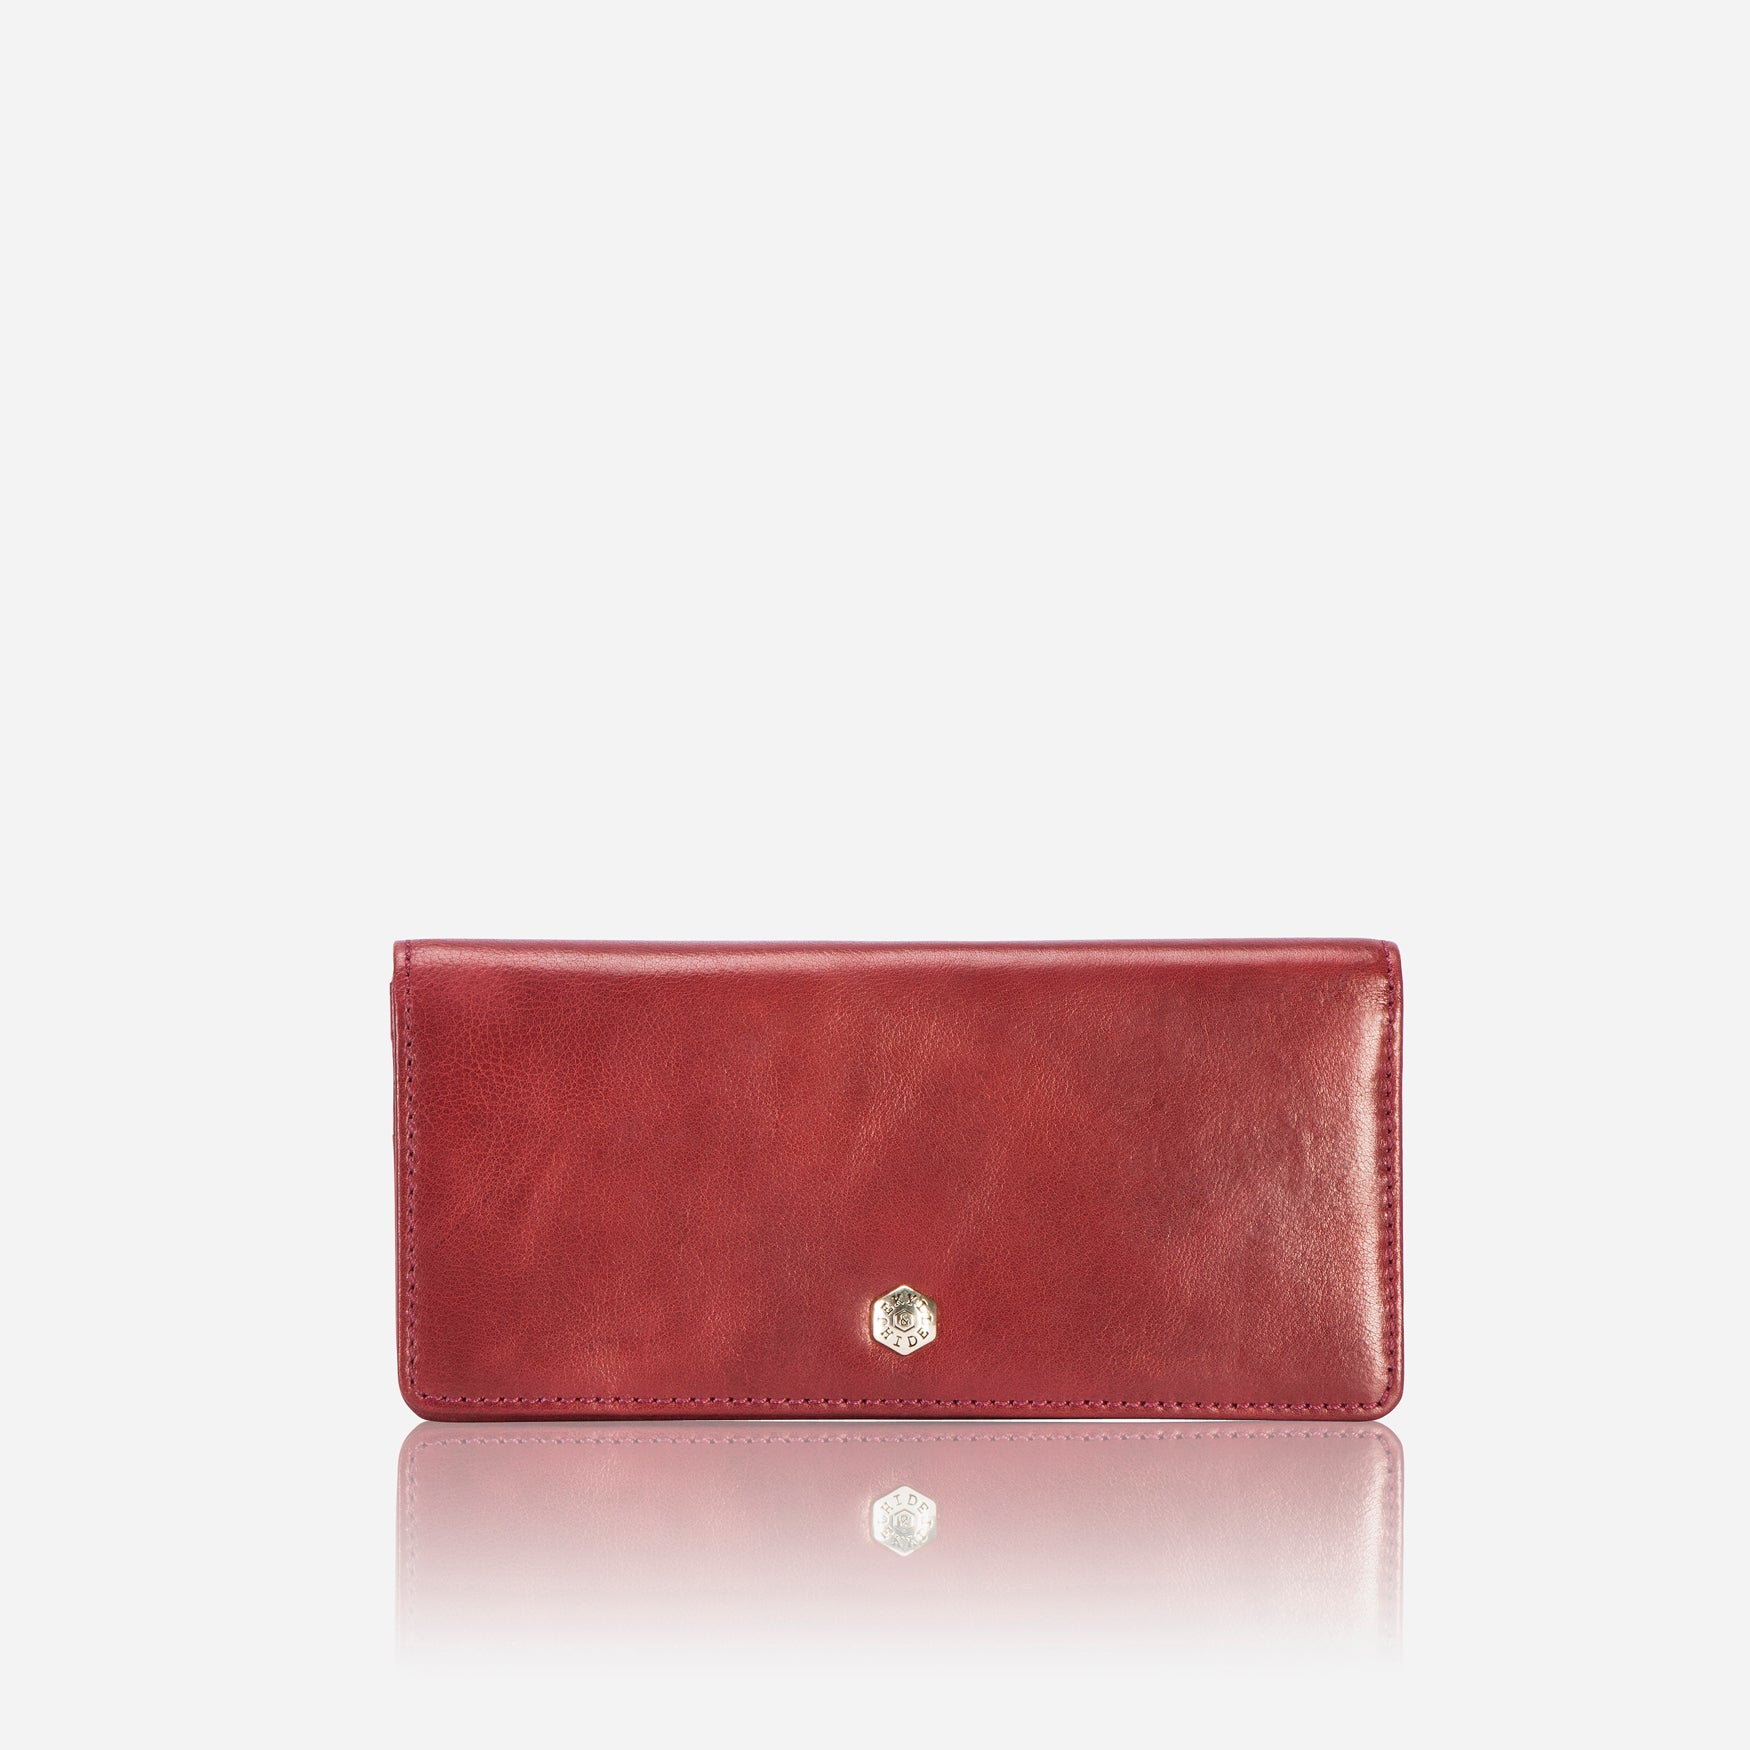 Large Multi-Compartment Leather Purse, Red